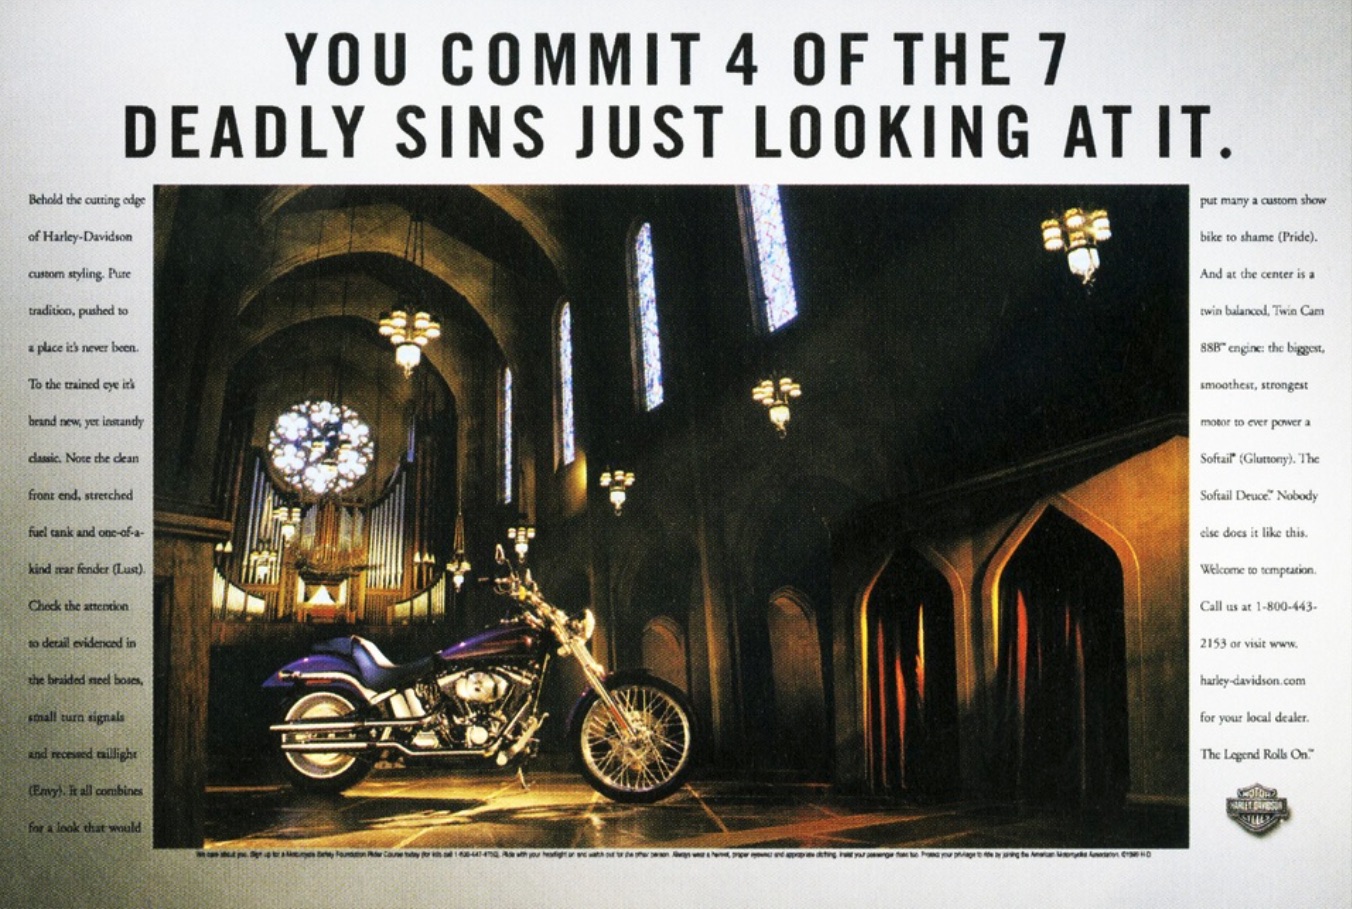 Harley Davidson: You commit 4 of the 7 deadly sins just looking at it